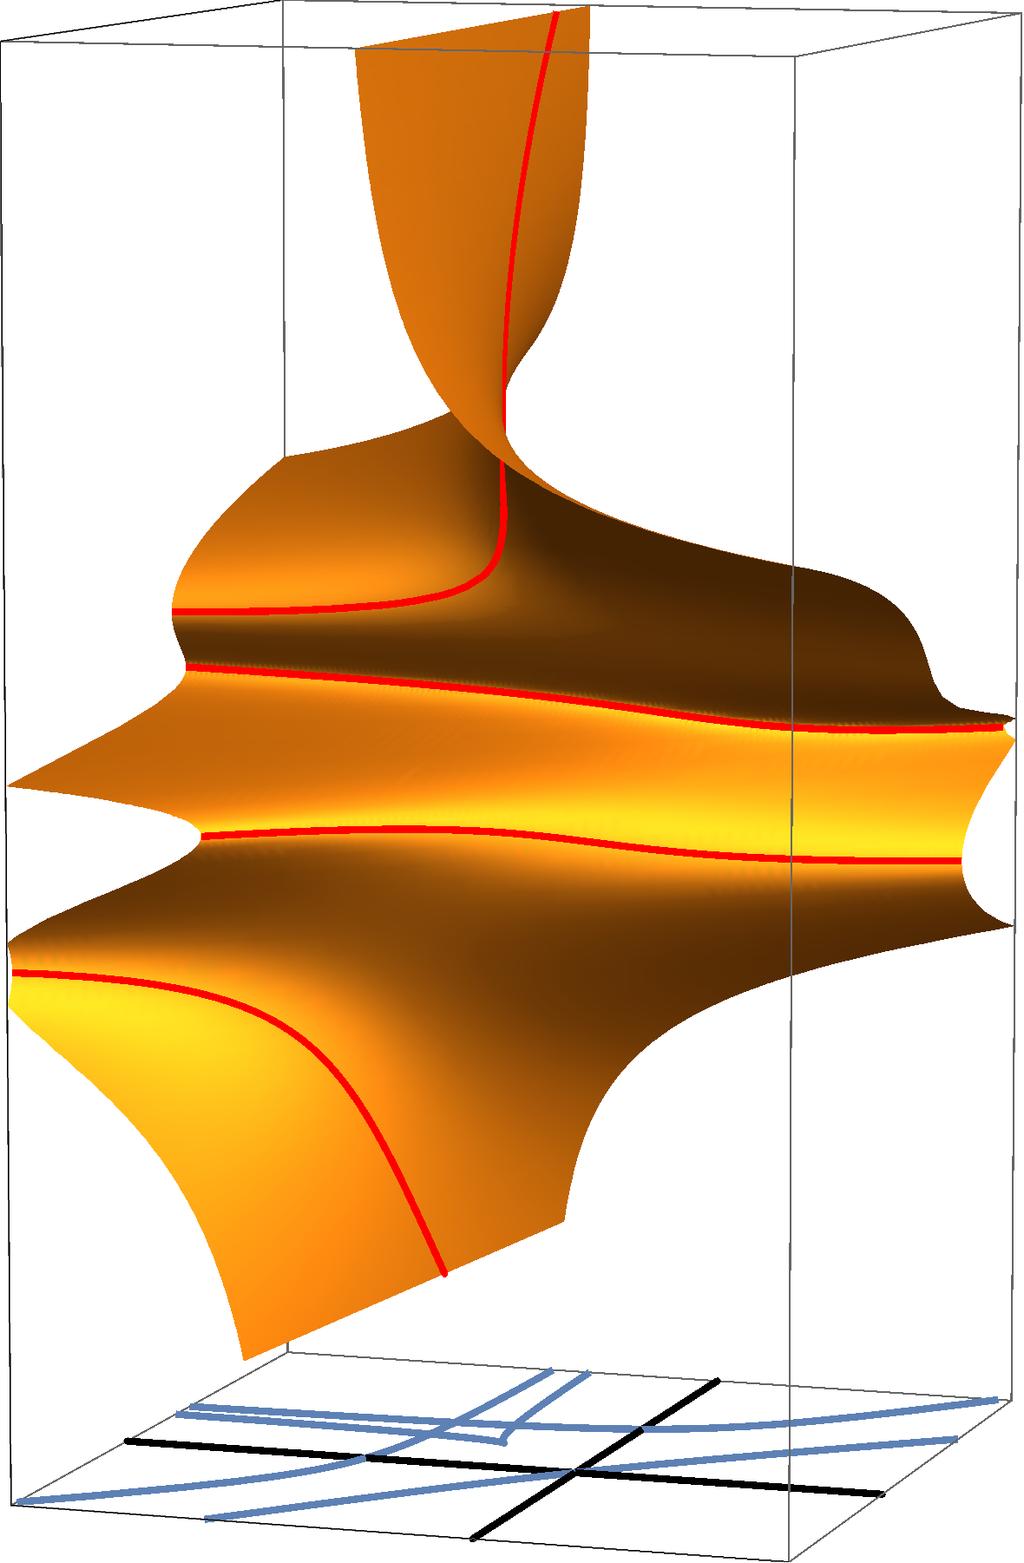 u u β 2 m 1 m 2 β 1 Figure 3: Left: The surface defined by f(u, m) = 0 for a three particle system with gravitational interaction.